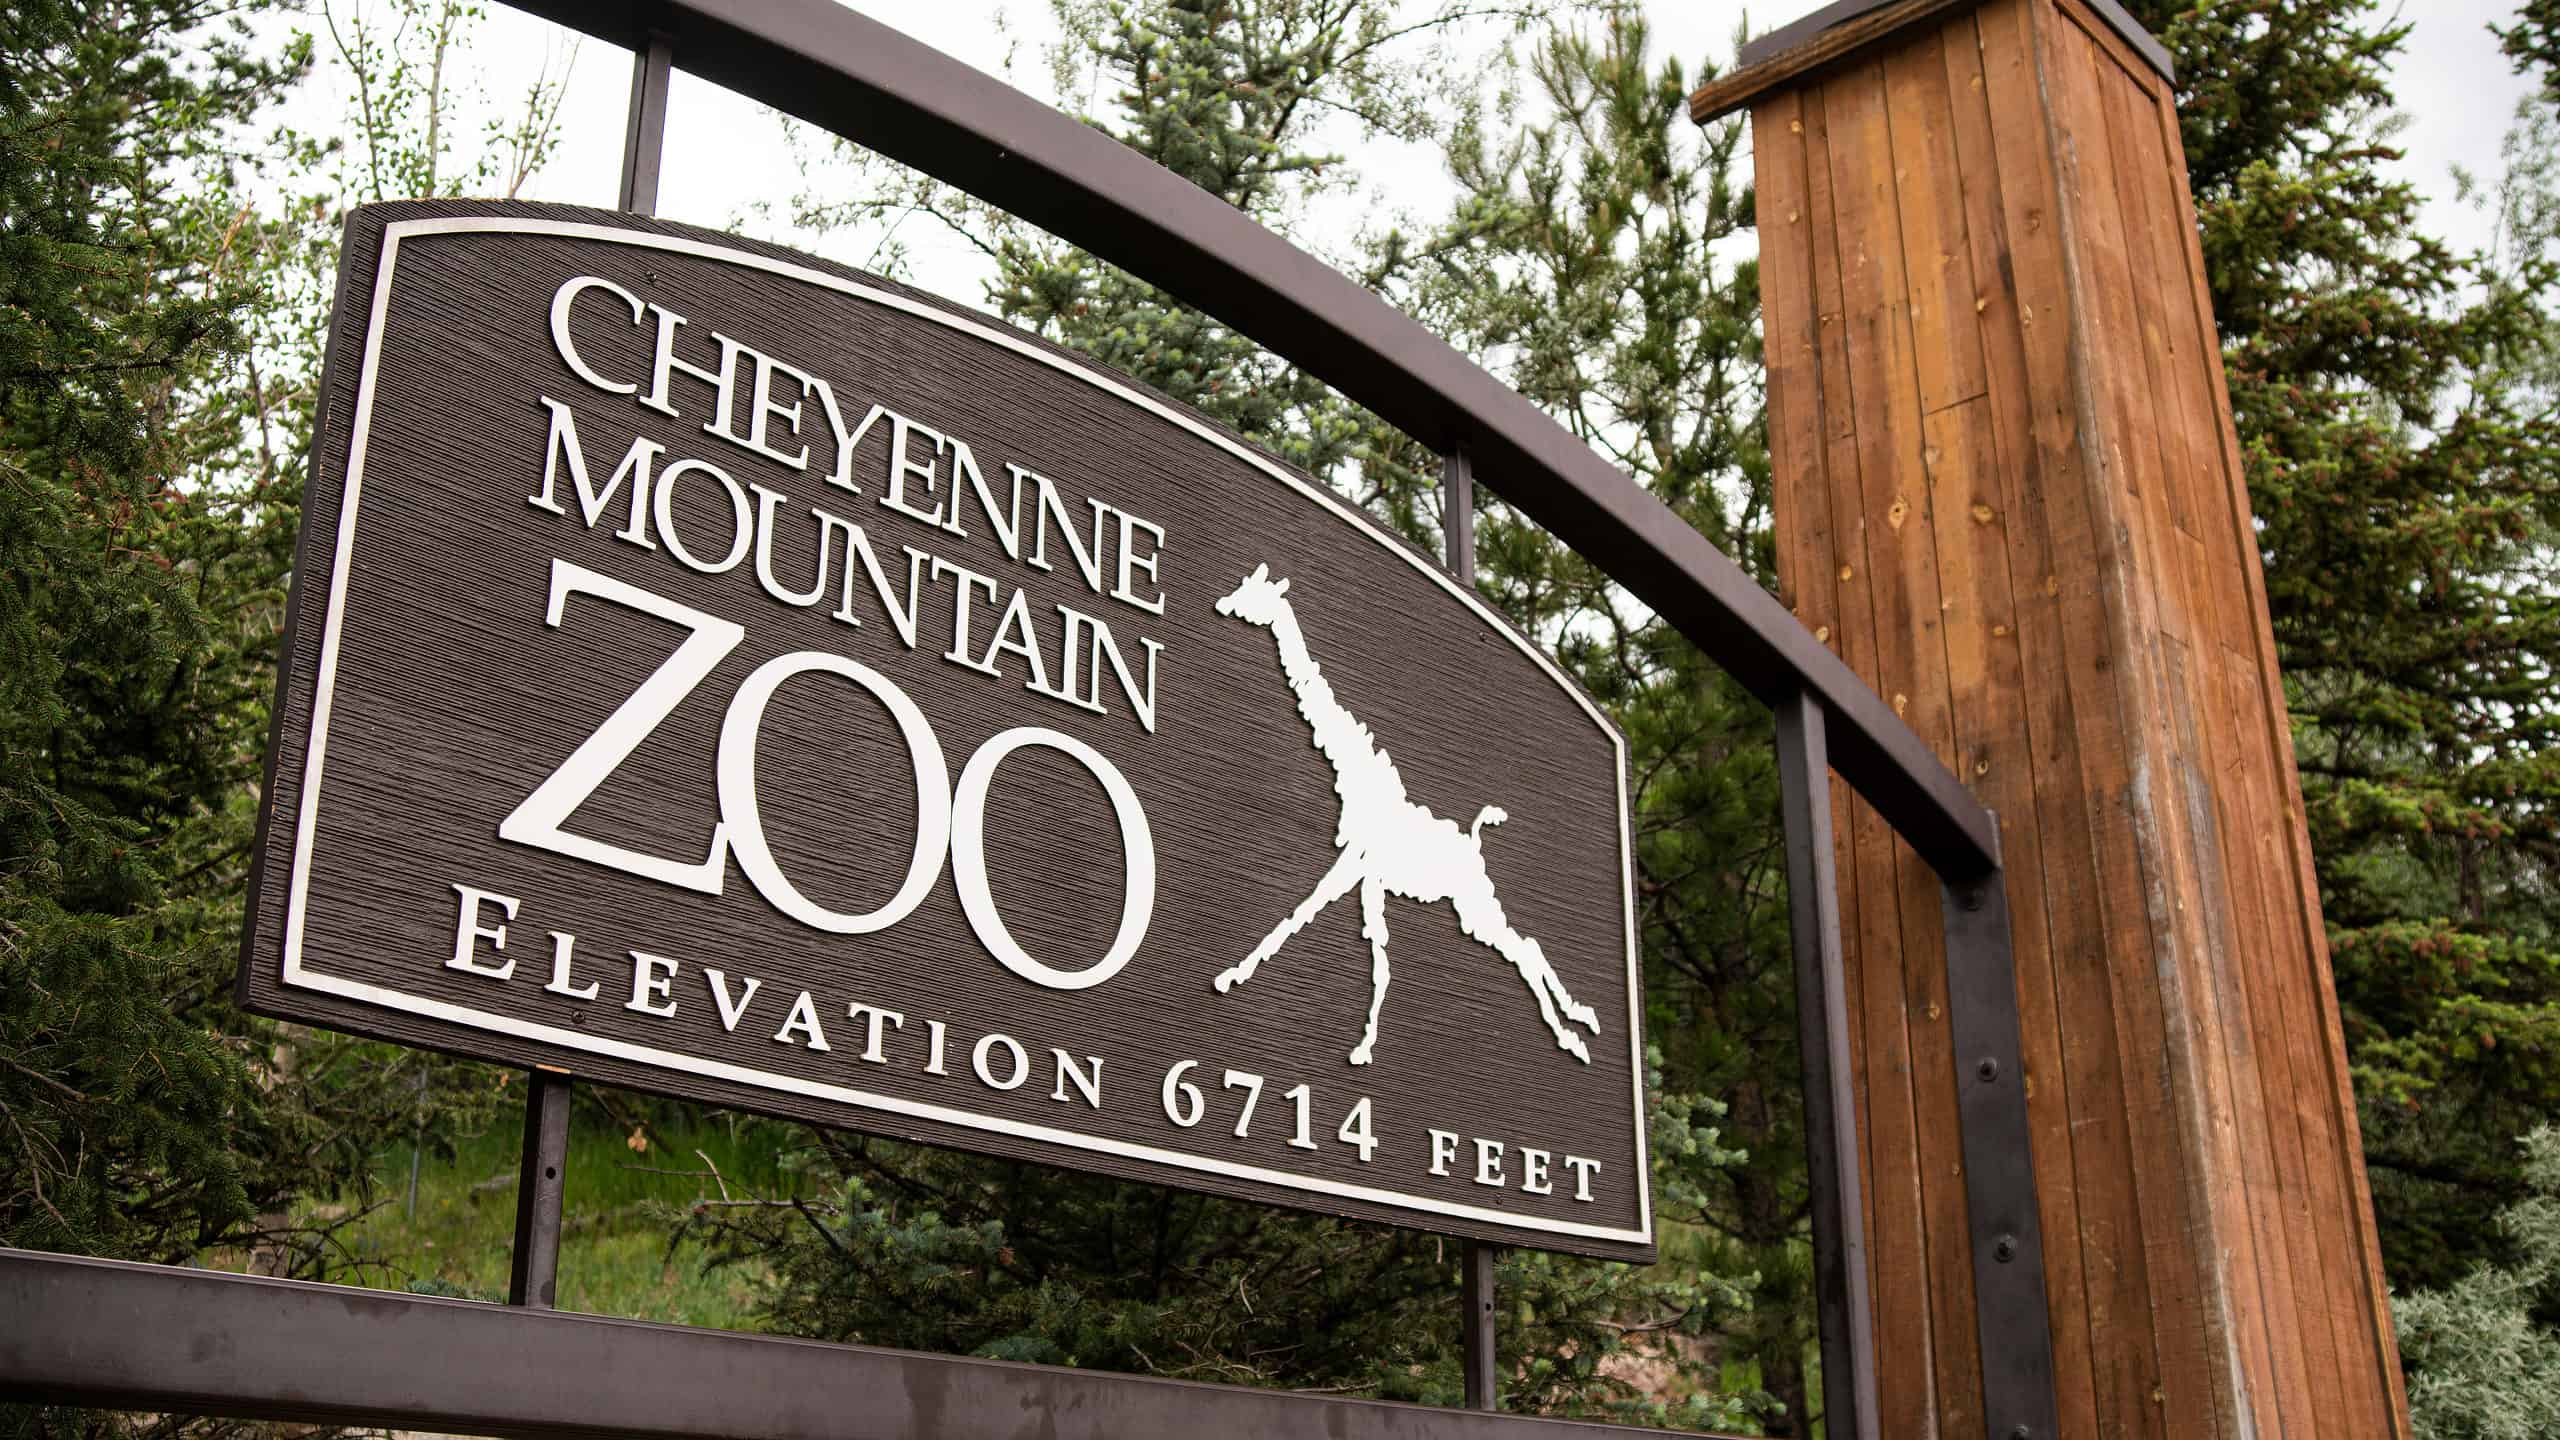 The Cheyenne Mountain Zoo is the highest zoo in the United States.